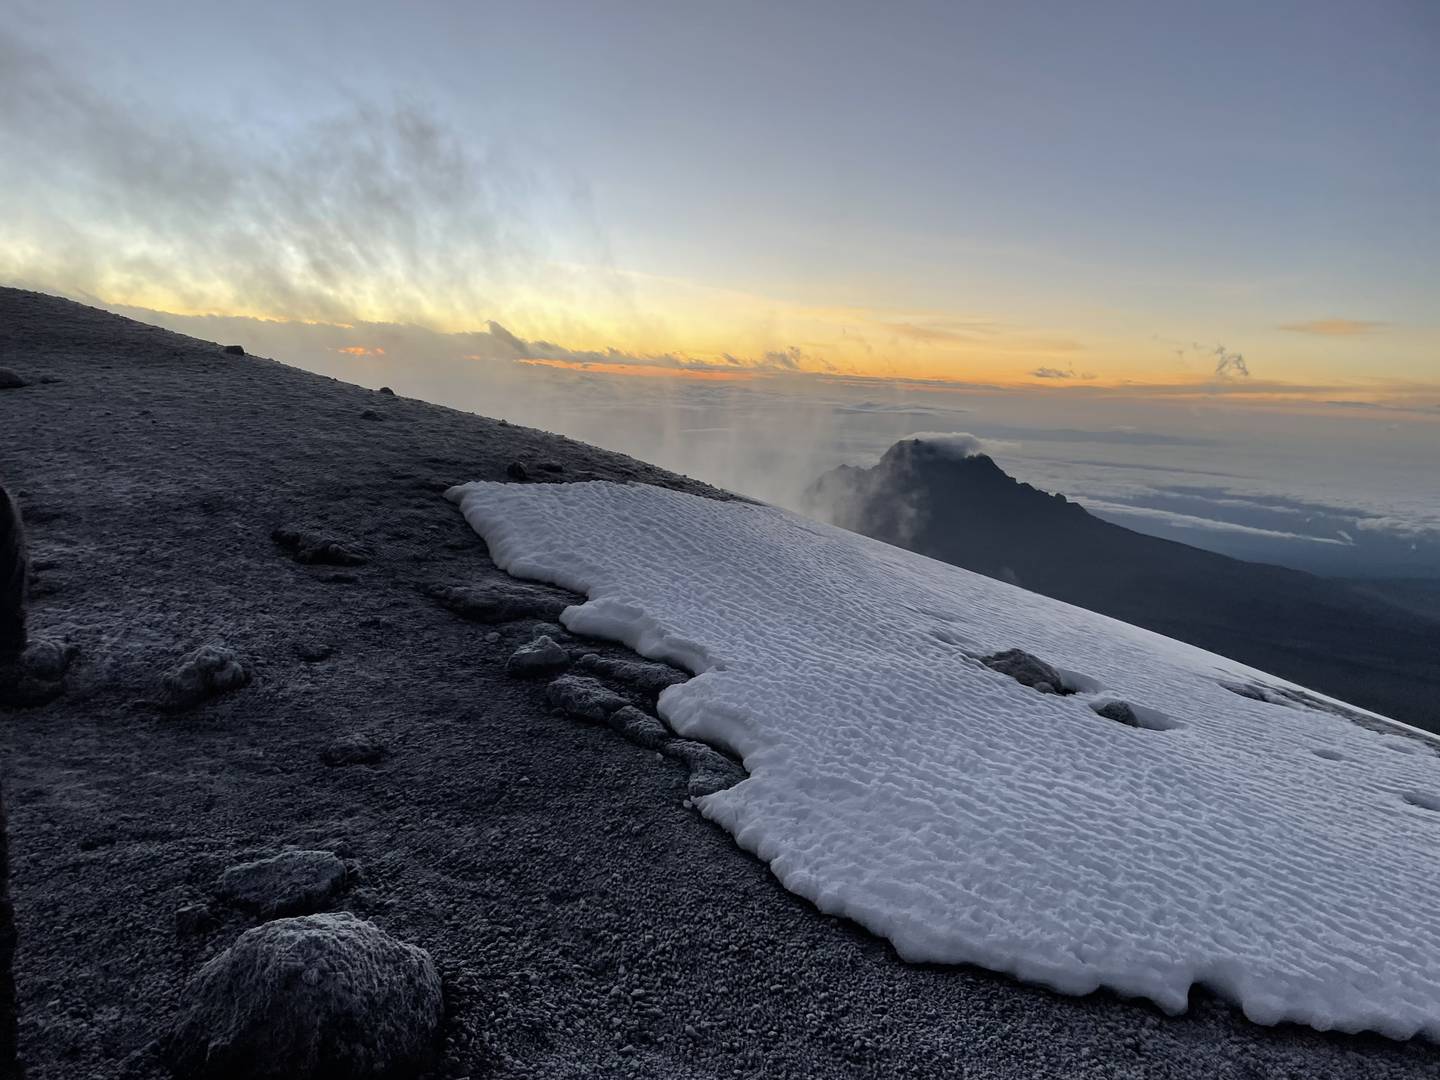 This view above the clouds on Mount Kilimanjaro in Tanzania was pictured in May 2022. A group of 13 volunteers hiked the 19,300-foot mountain with DeKalb-based nonprofit Tanzania Development Support to raise awareness and nearly $40,000 in funds for educational improvements for girls and boys in Mara, Tanzania.